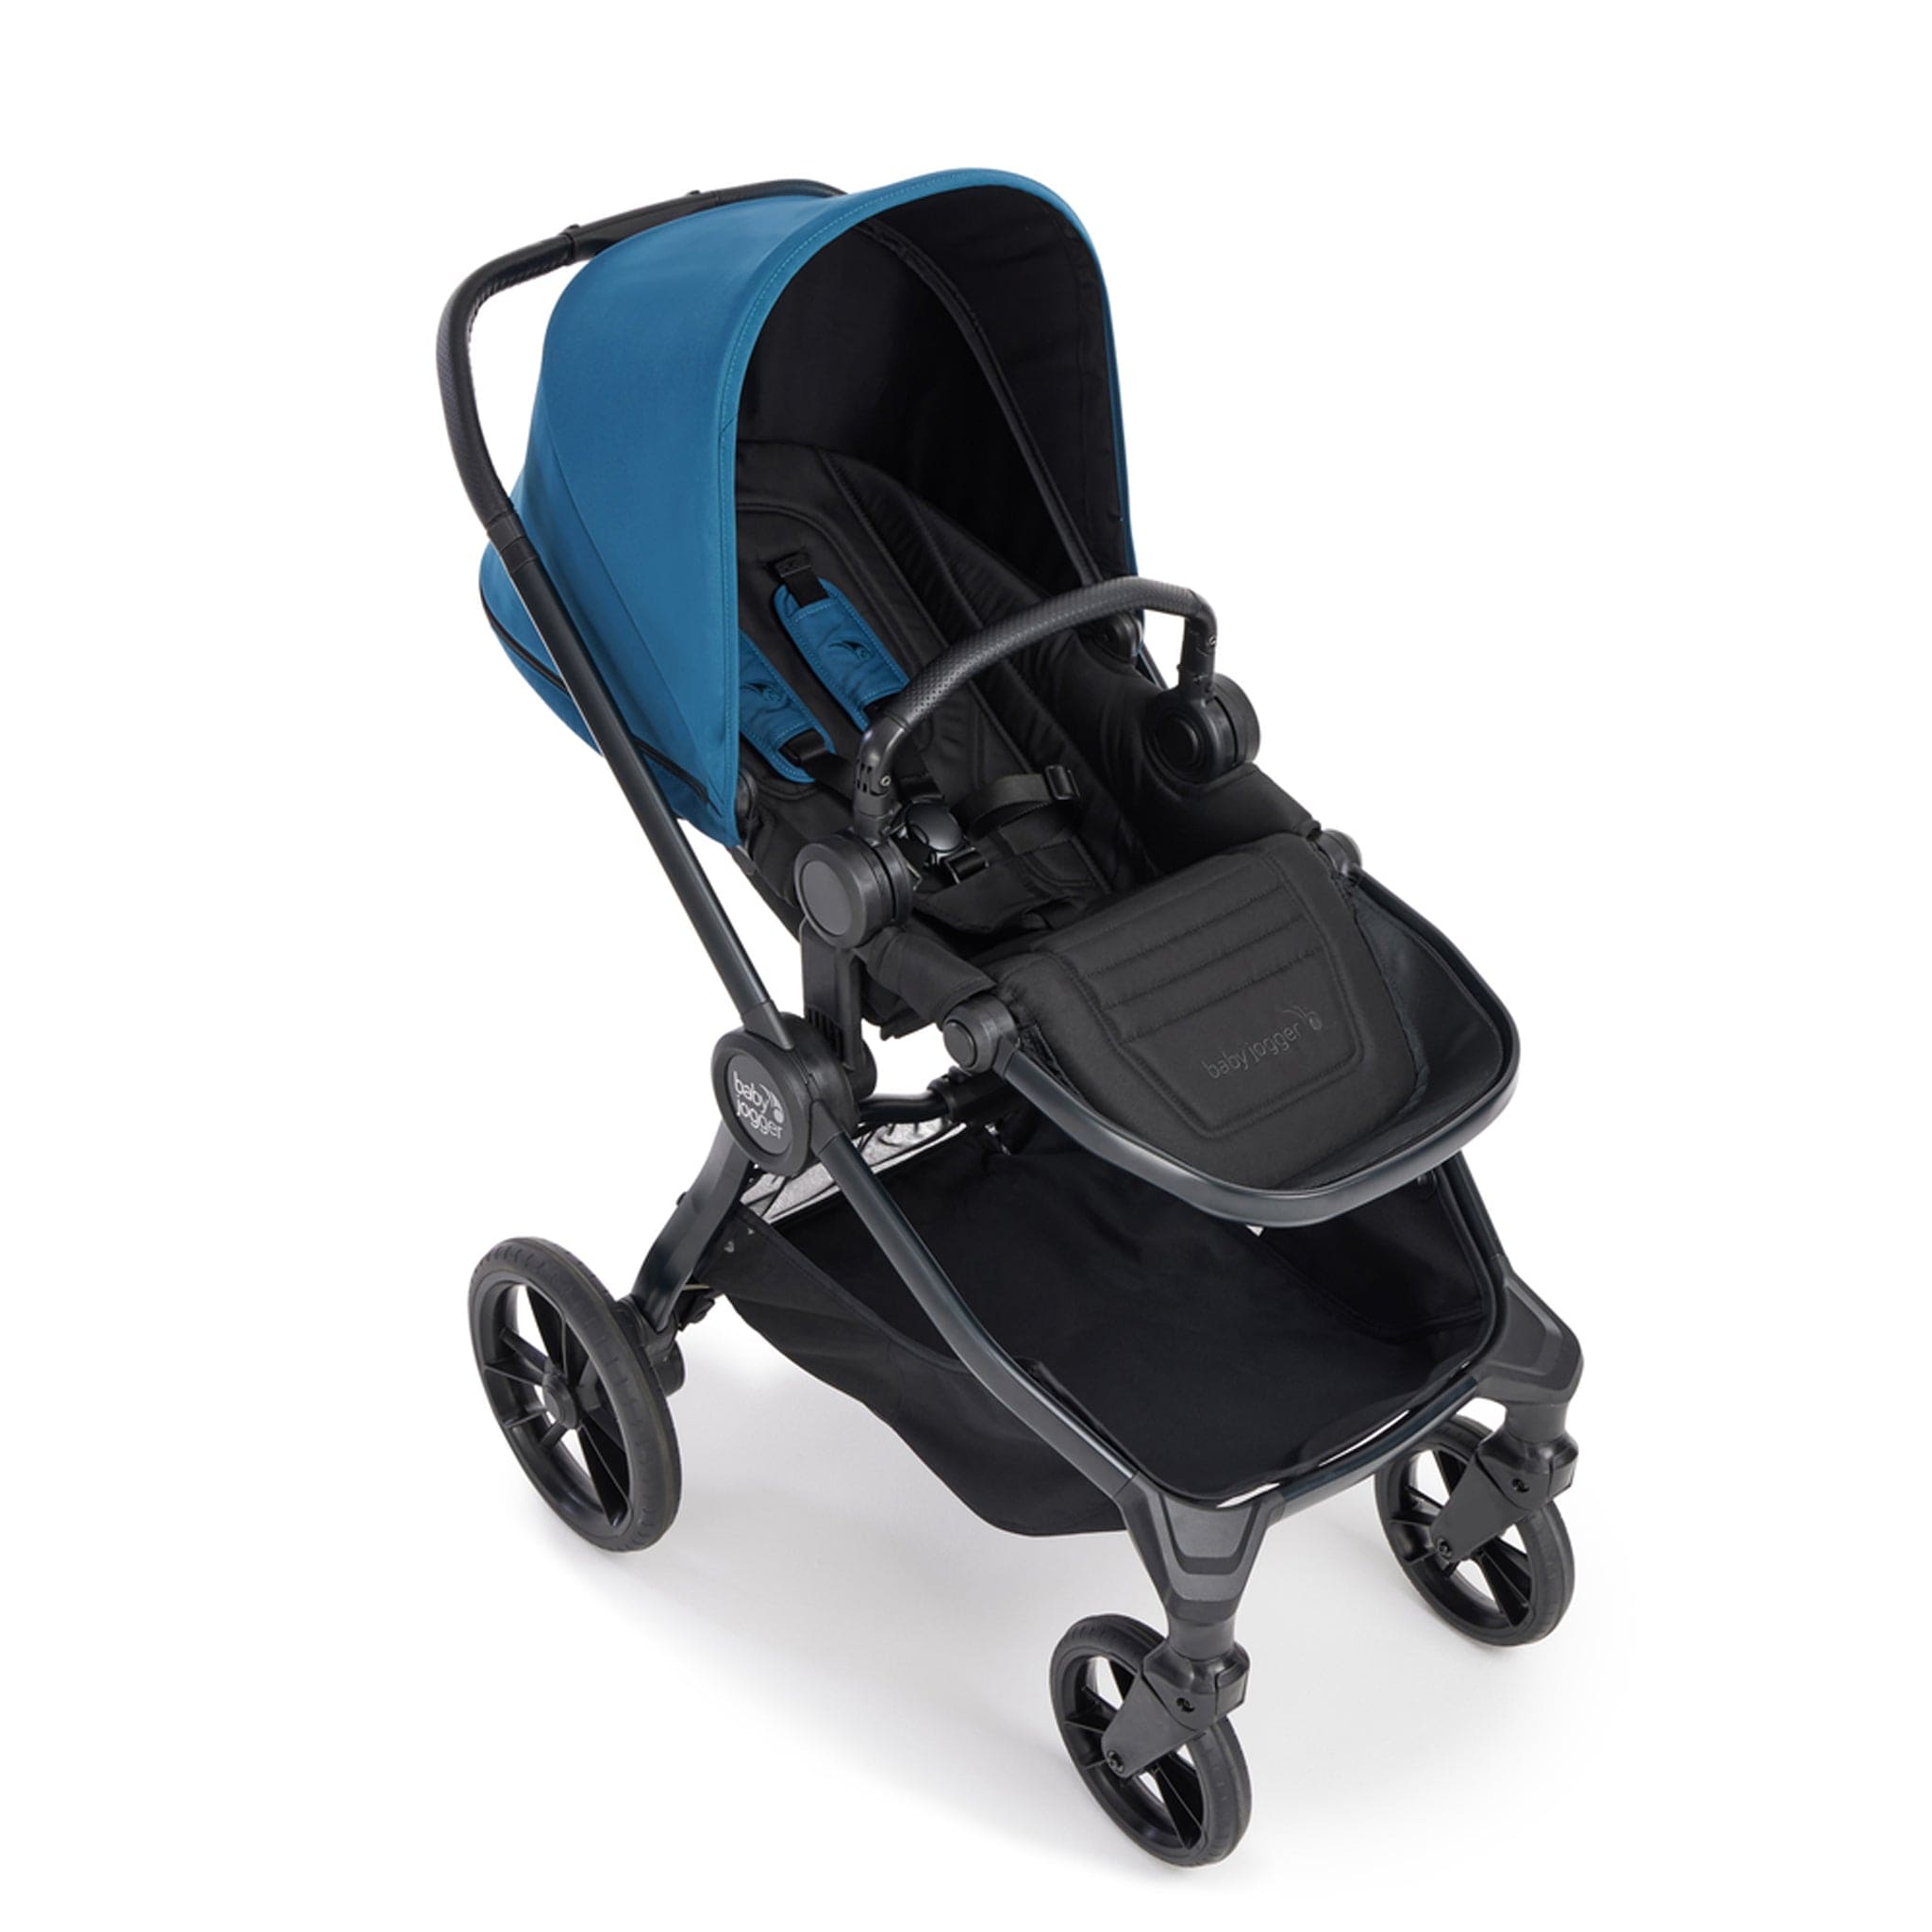 Baby Jogger baby pushchairs Baby Jogger City Sights Cabriofix i-Size Bundle - Deep Teal